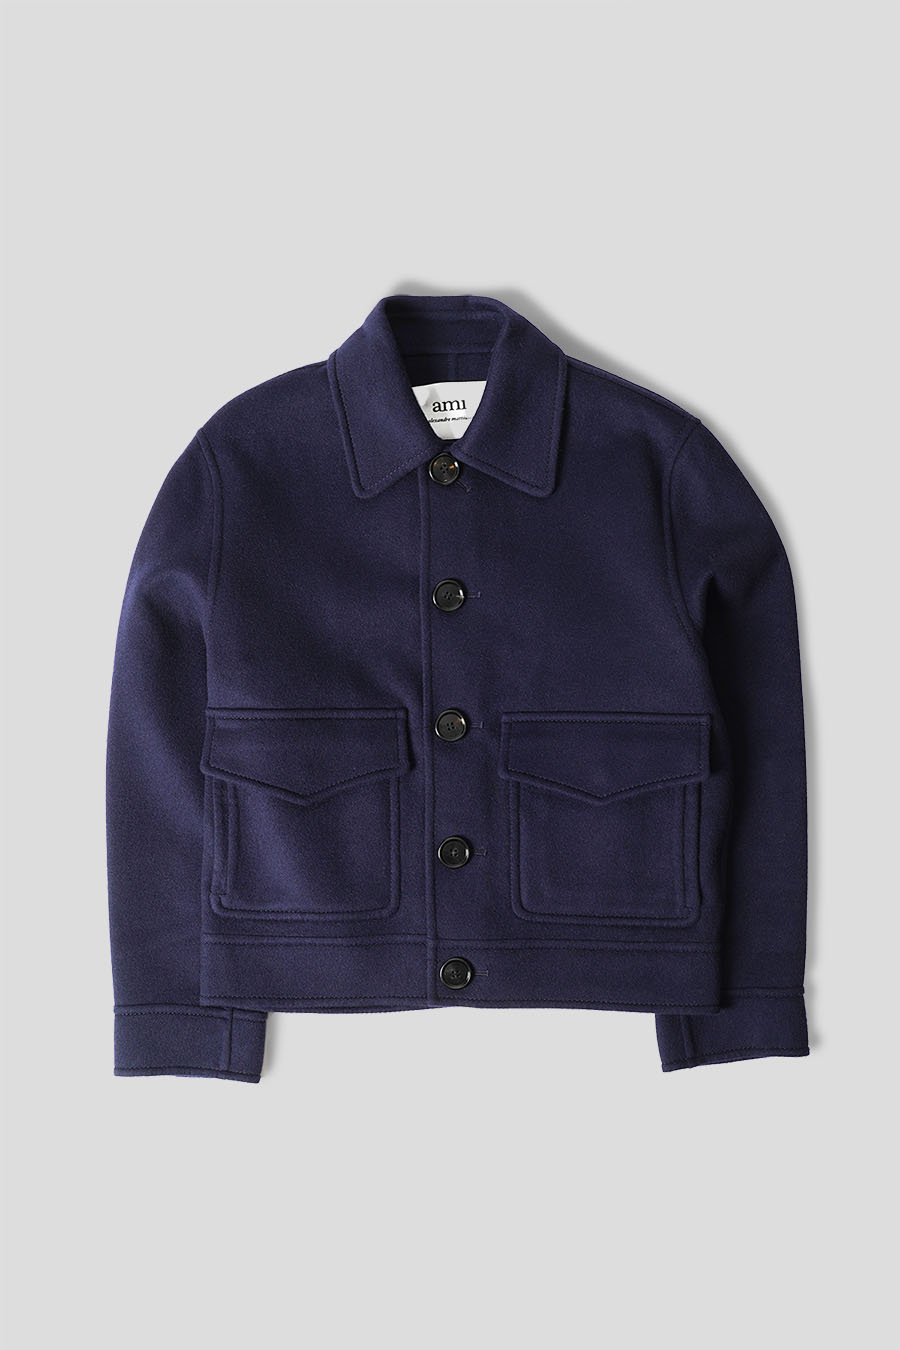 AMI PARIS - DOUBLE-FACED BOXY FIT JACKET MIDNIGHT BLUE - LE LABO STORE